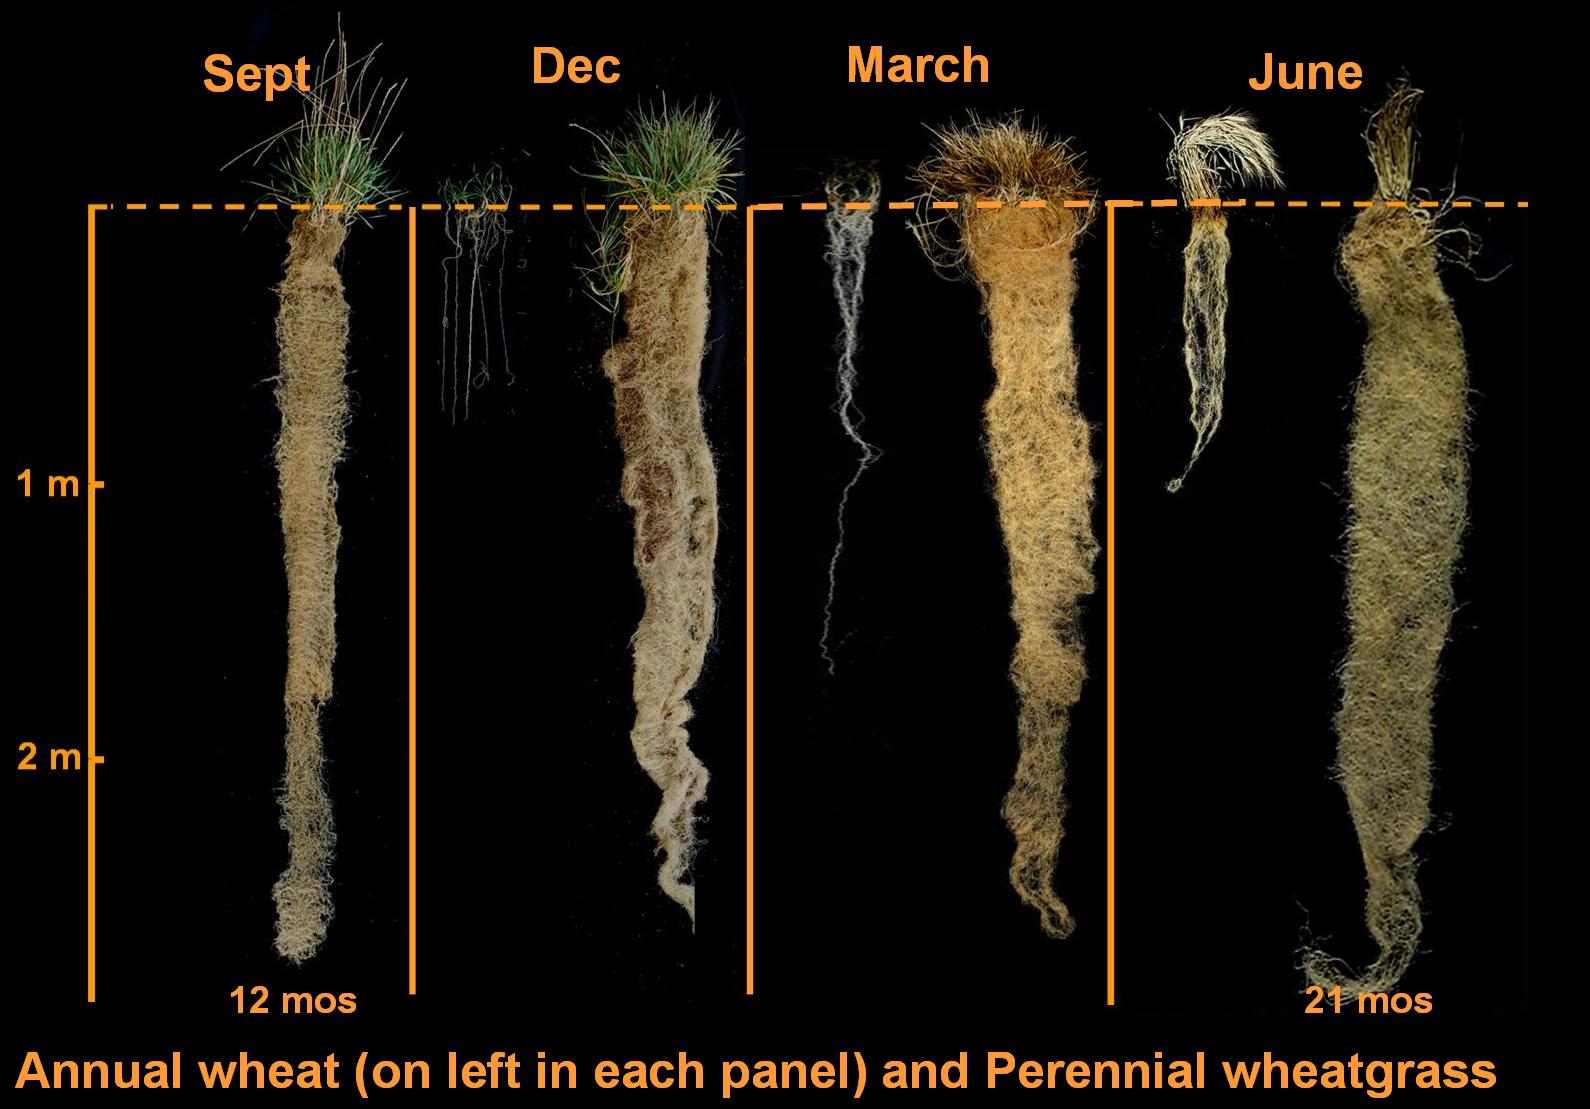 Image of wheat roots: annual wheat vs perennial wheatgrass